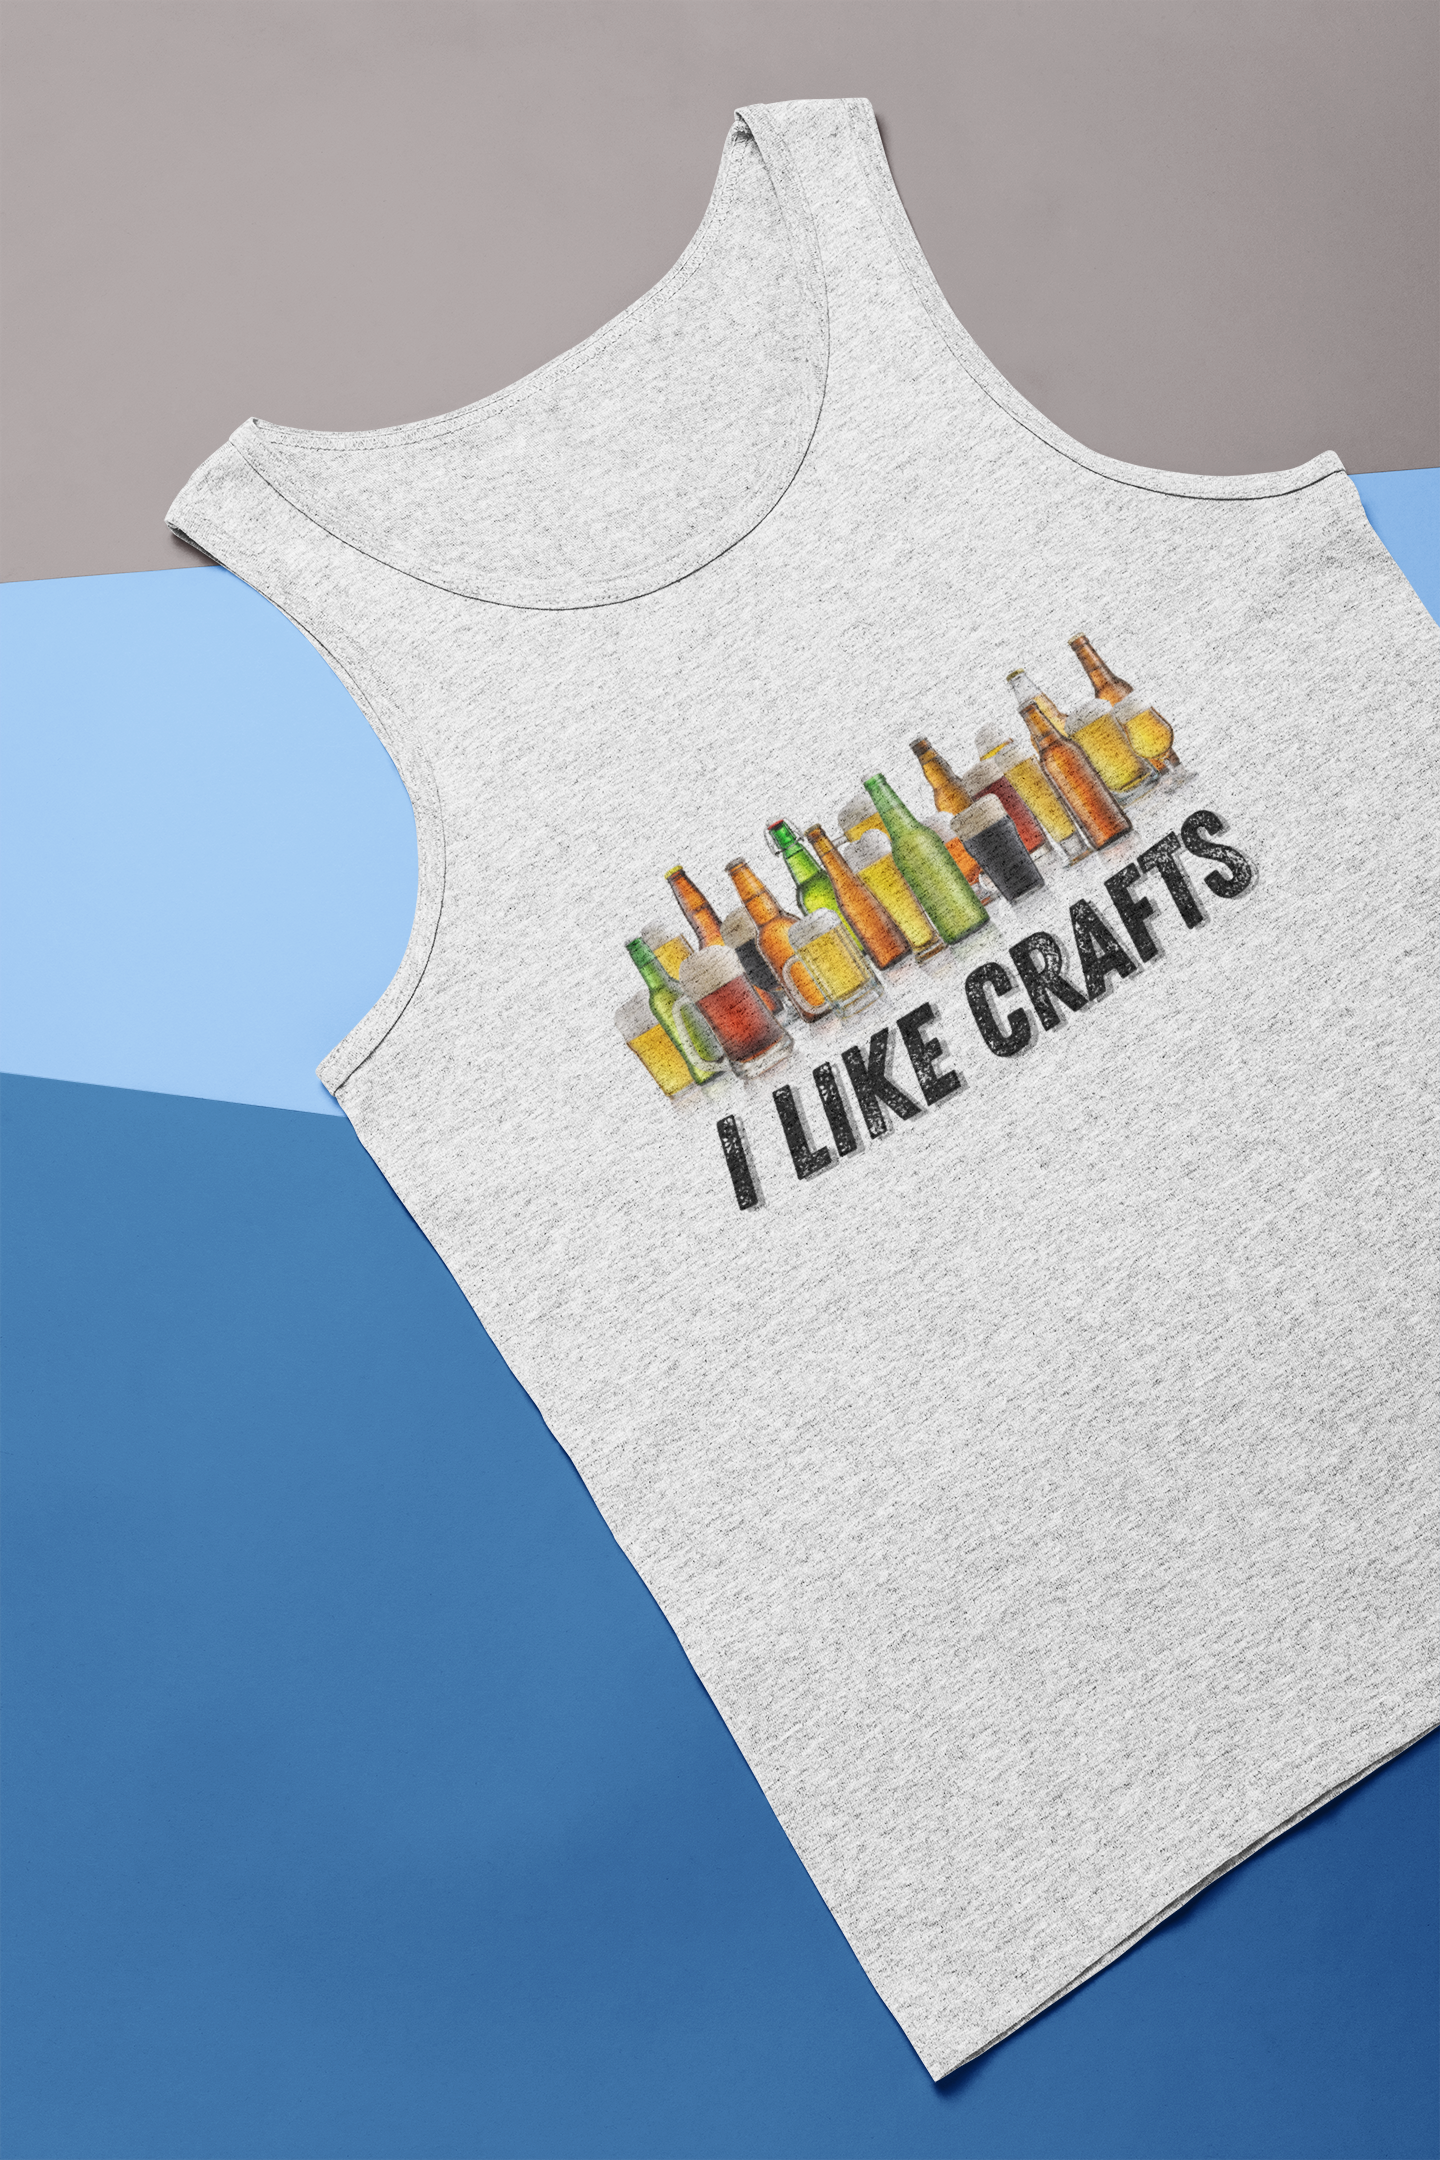 I Like Crafts Tank Top- Athletic Heather